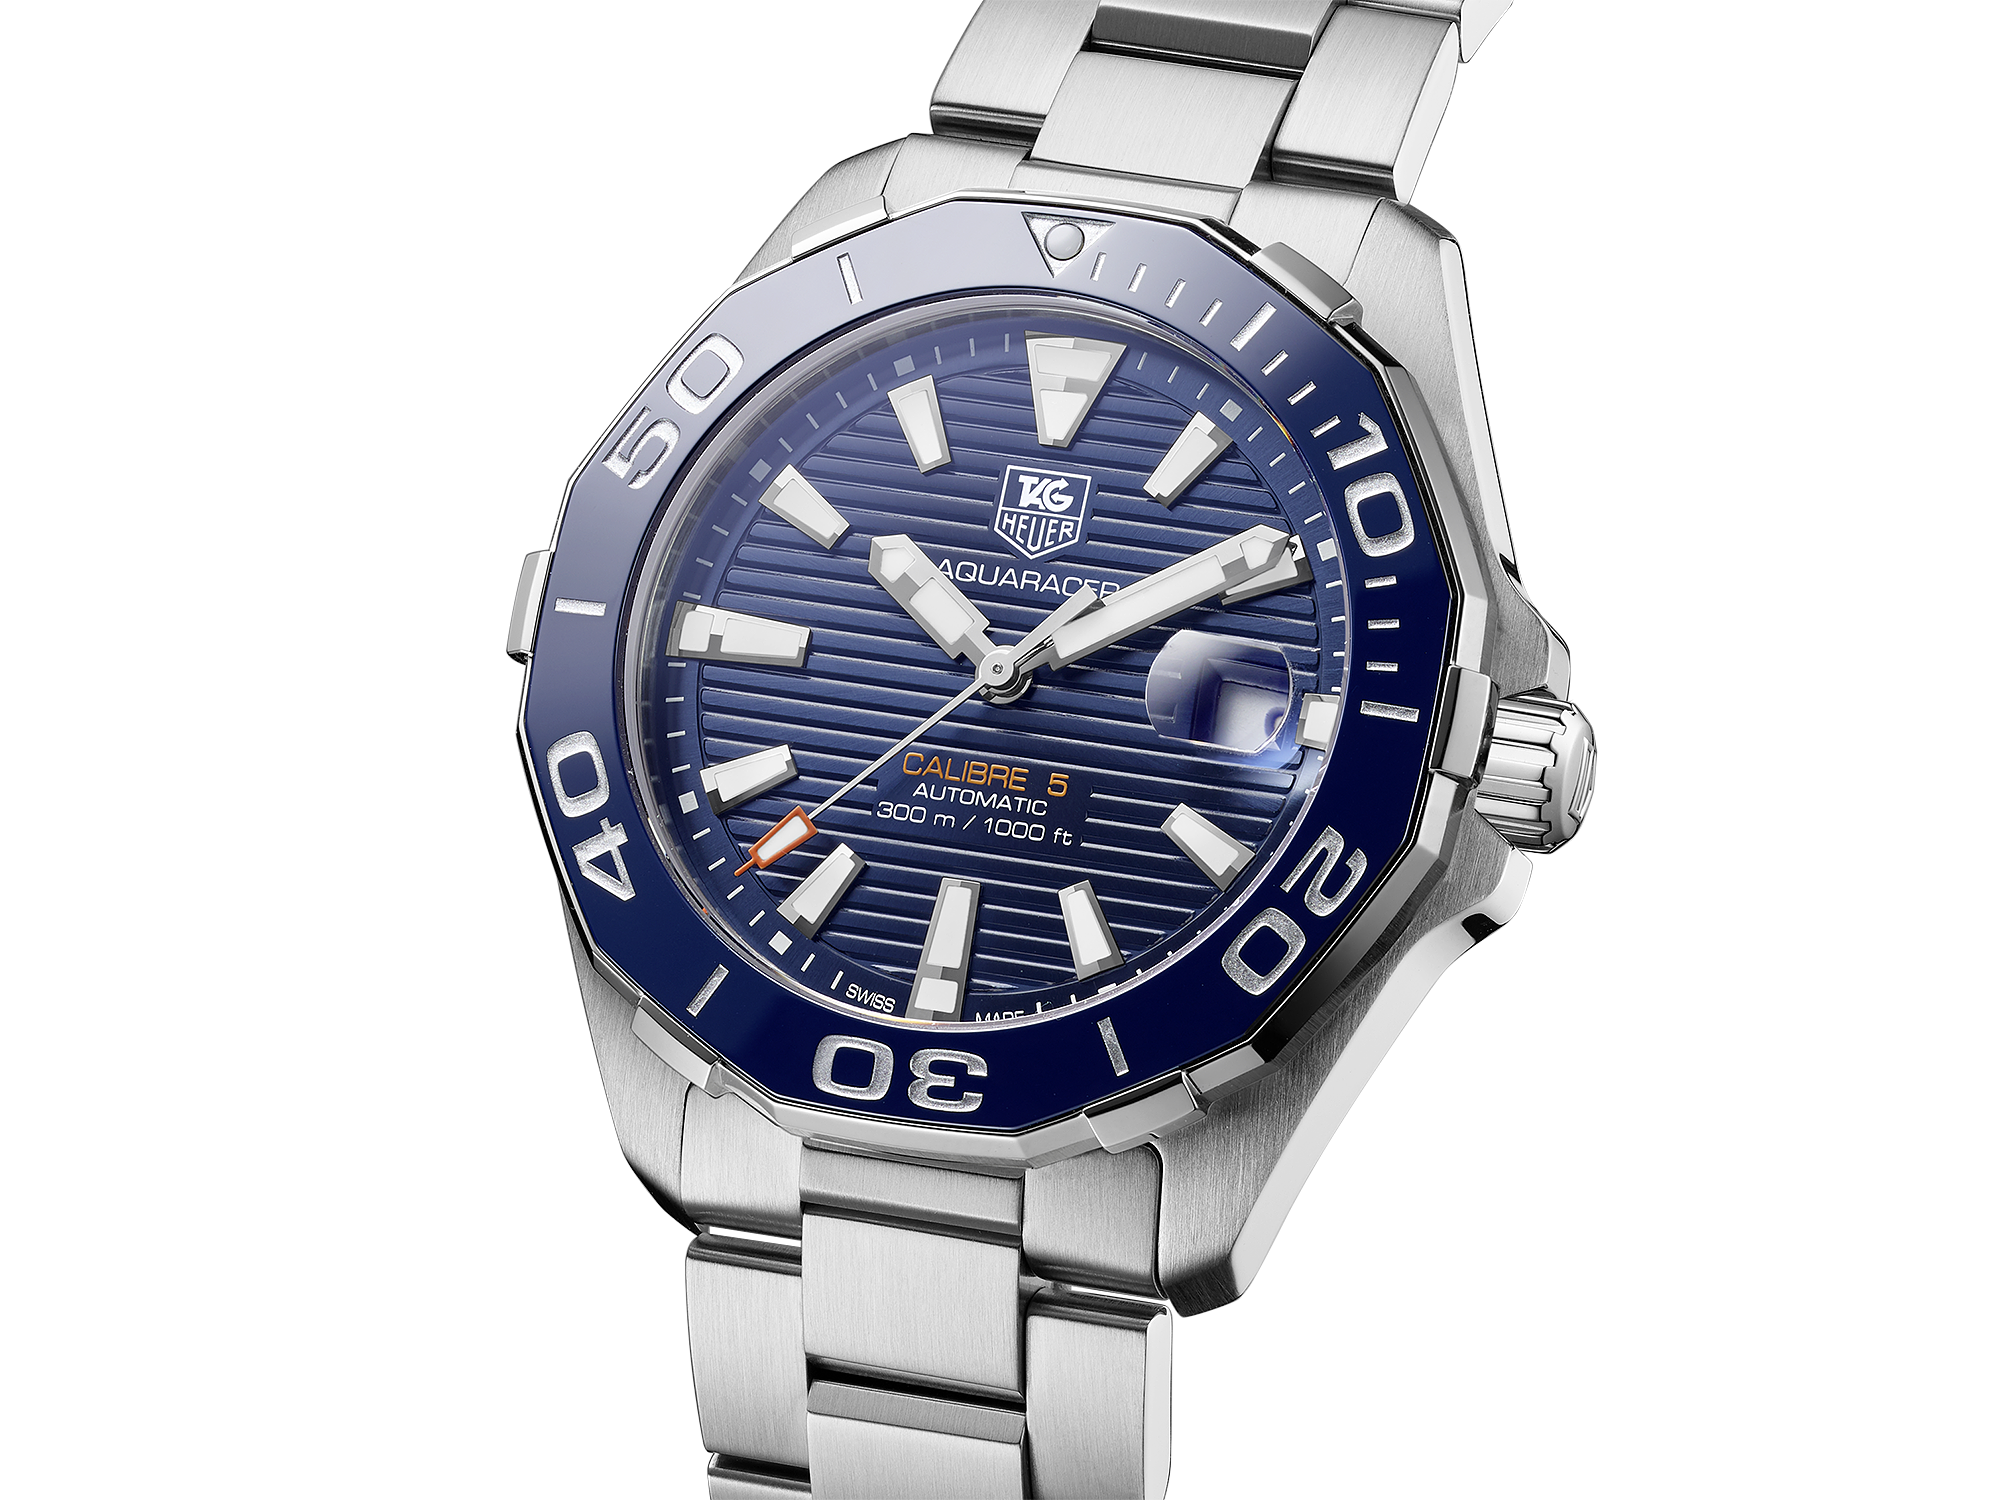 TAG Heuer Aquaracer DiCaprio Green Cross limited n. 1499/1600